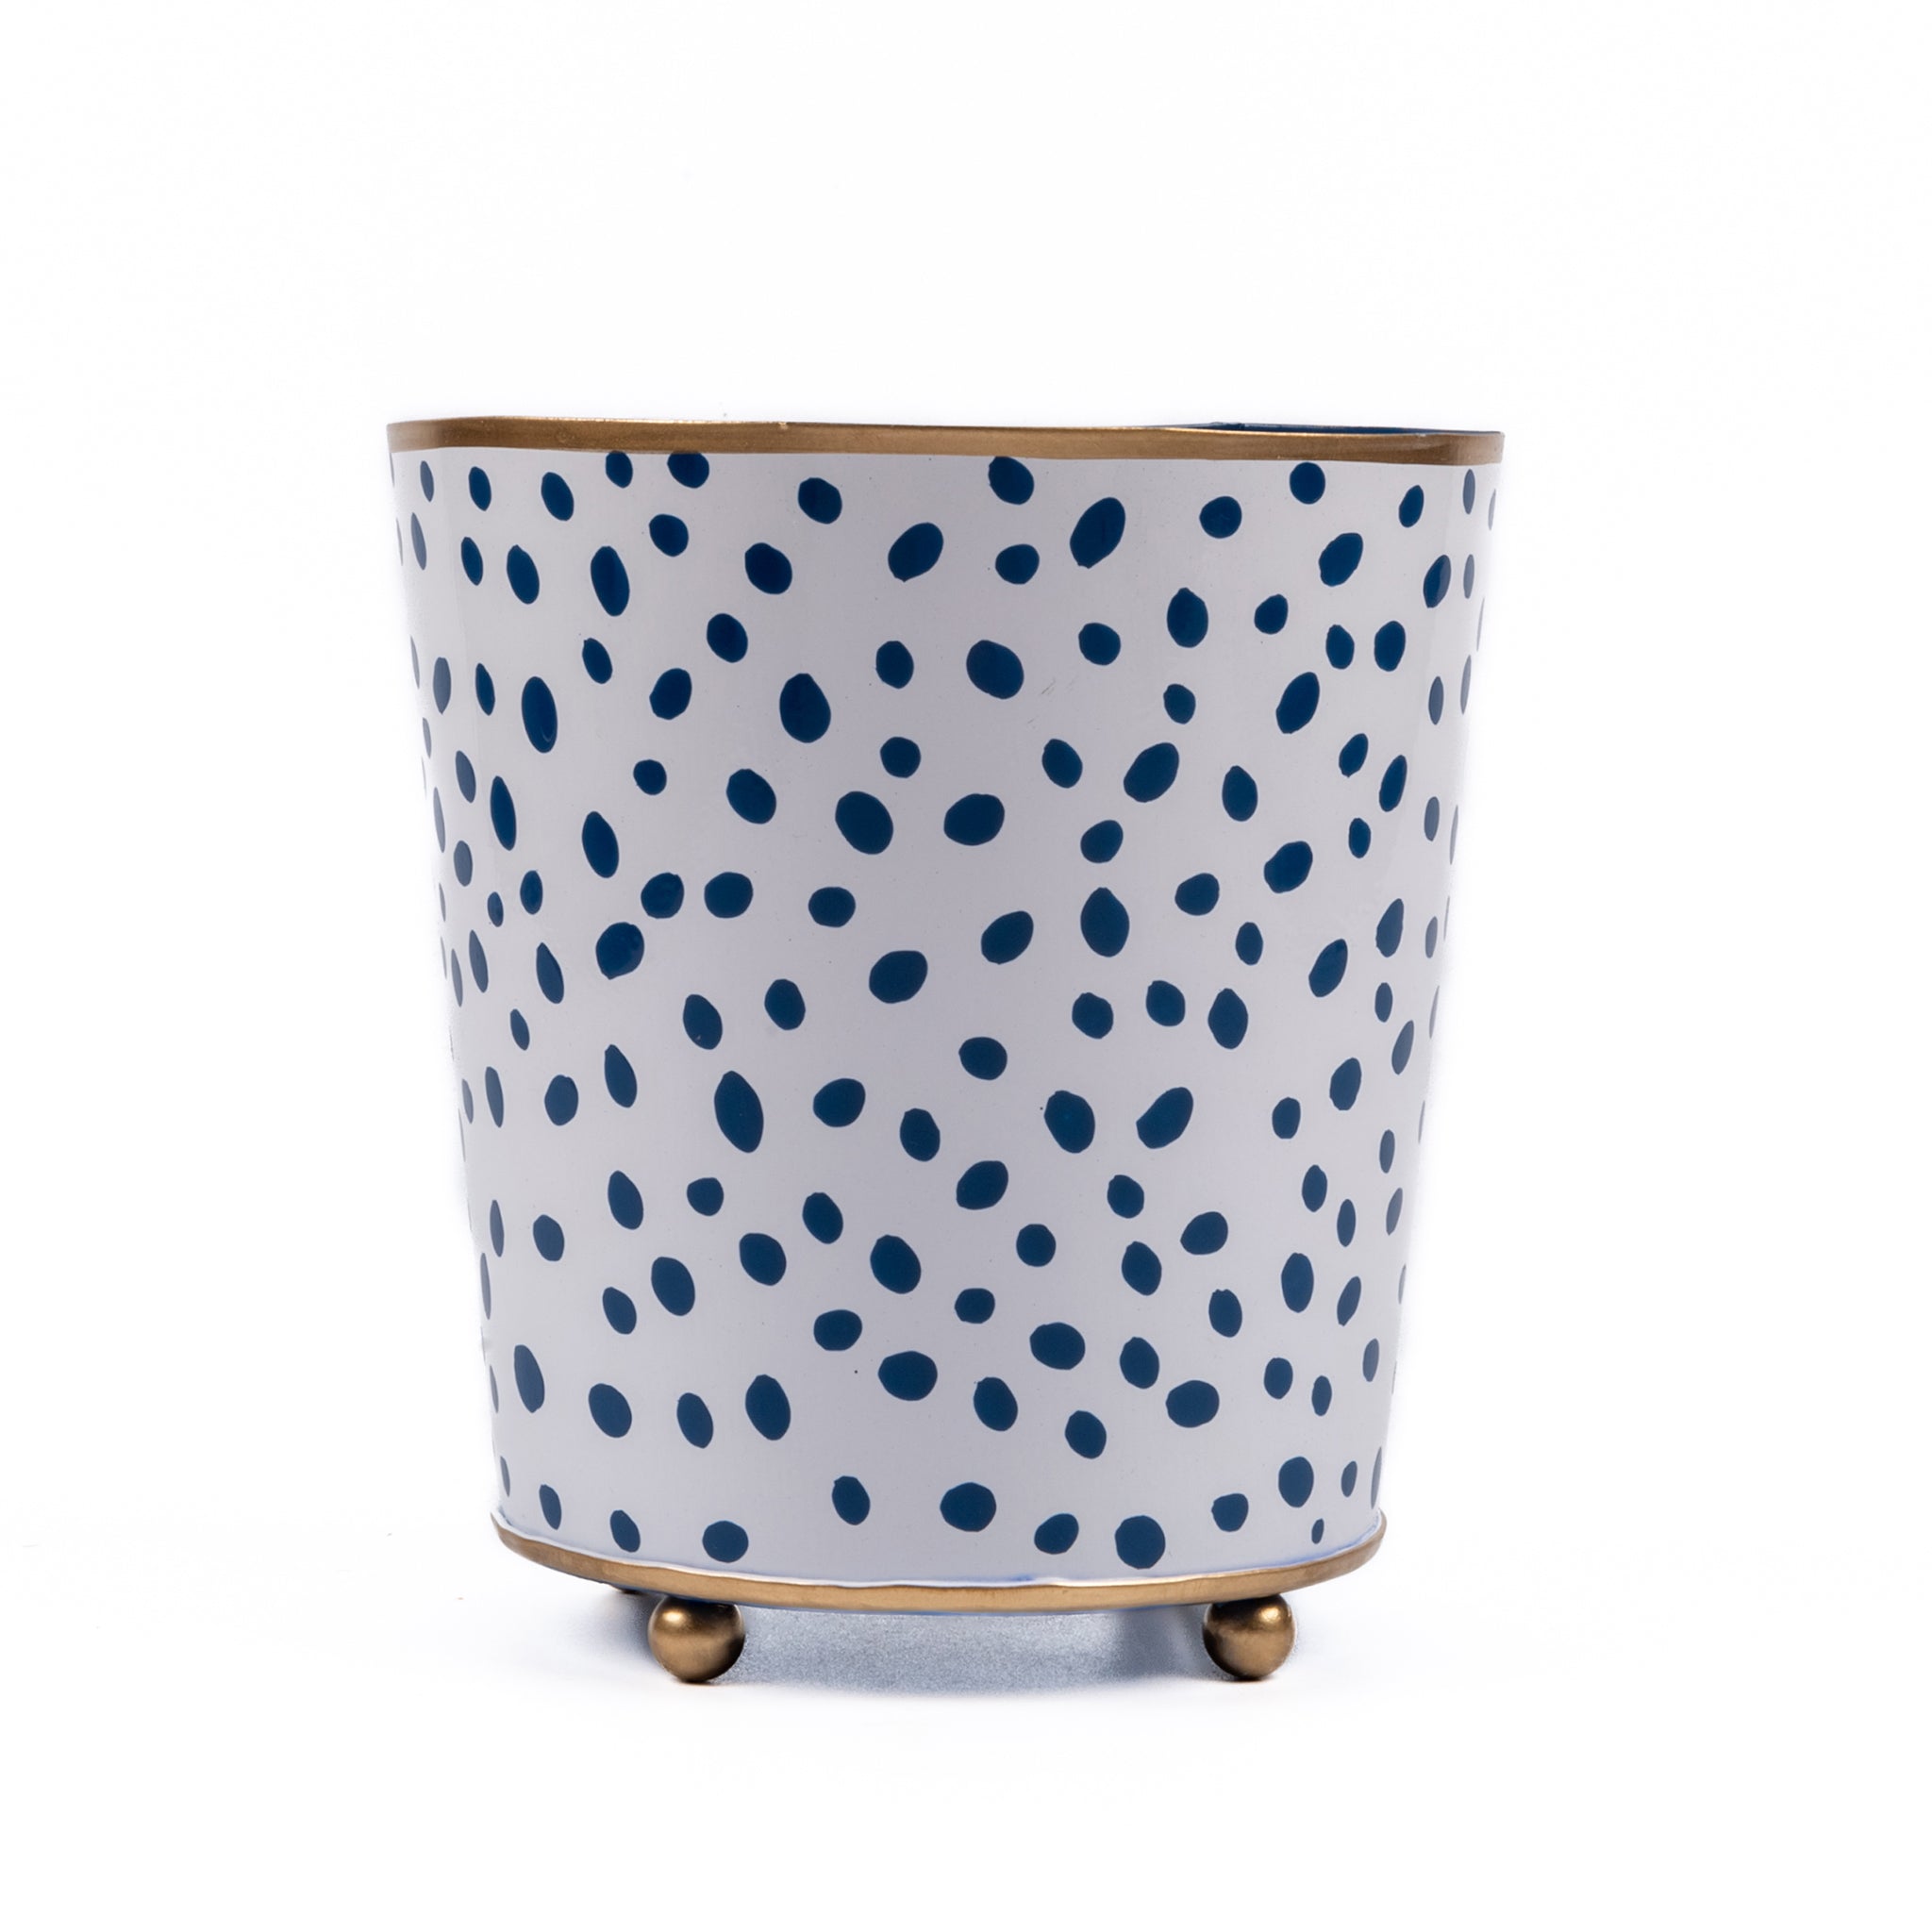 Spot-On Hand Painted Round Cachepot Planter